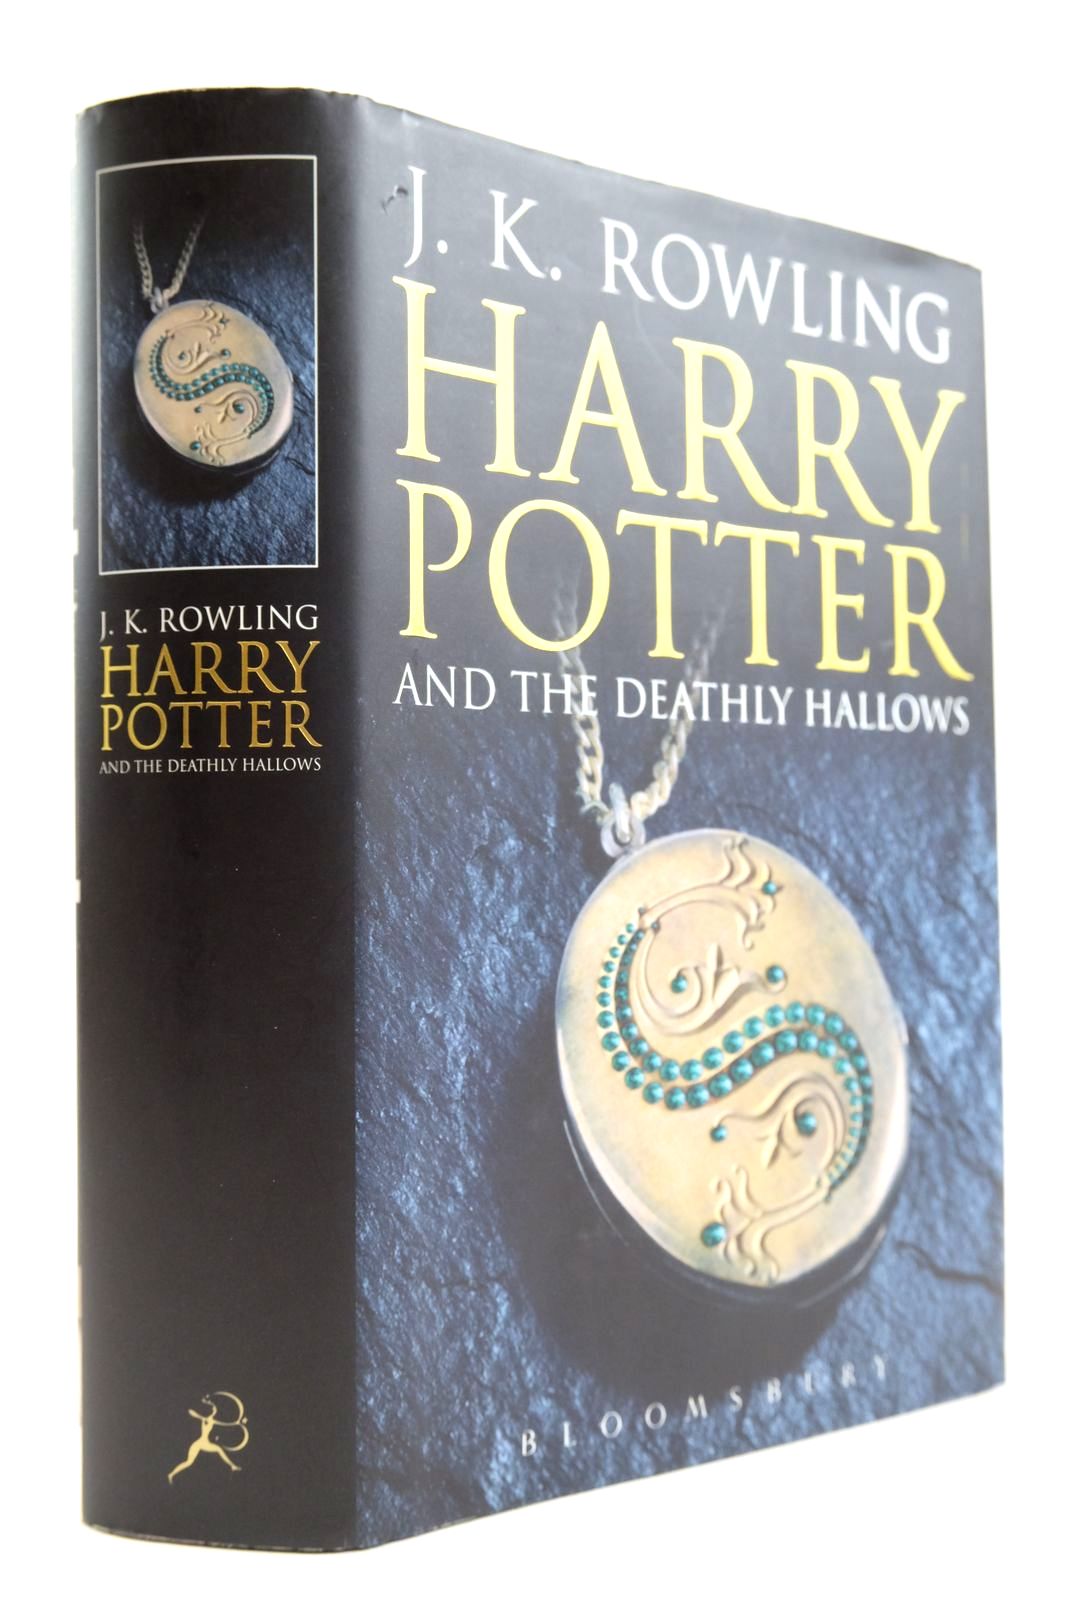 Photo of HARRY POTTER AND THE DEATHLY HALLOWS written by Rowling, J.K. published by Bloomsbury (STOCK CODE: 2133077)  for sale by Stella & Rose's Books